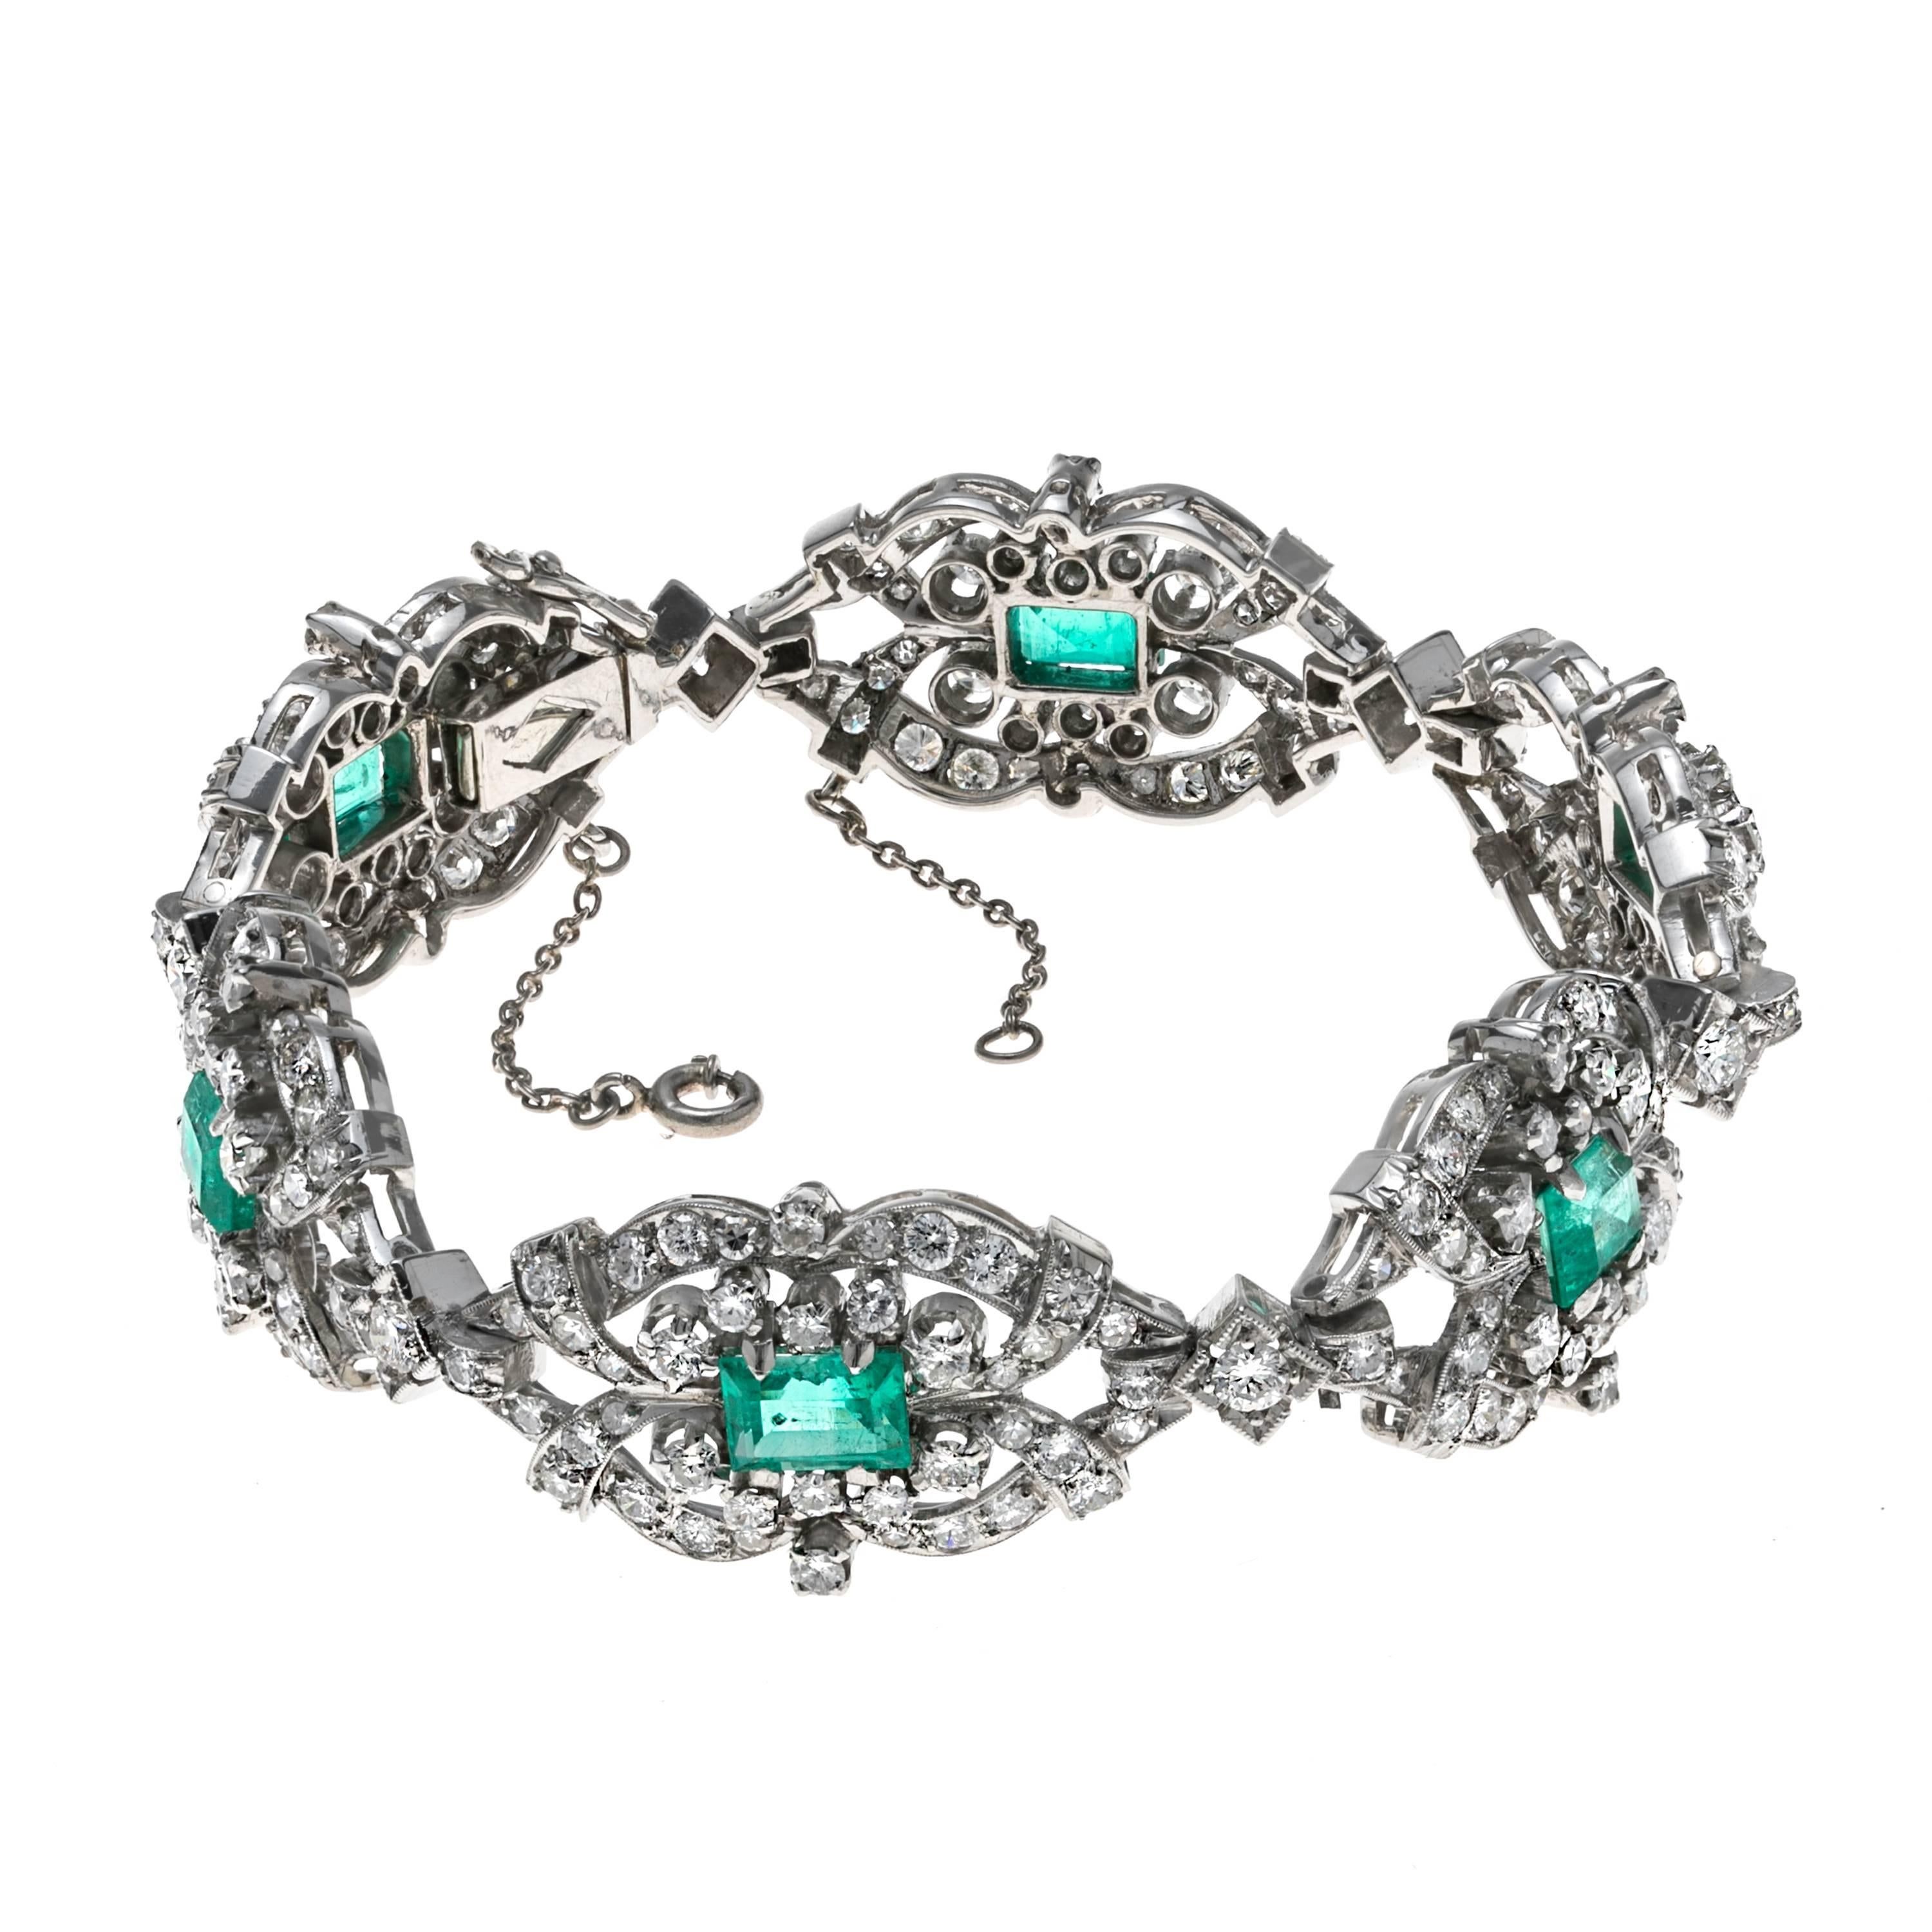 Antique Emerald and Diamond Platinum Bracelet.   Comprised of Six links of medallions featuring six Colombian Emeralds, each weighing approximately 0.85 to 1.25 Ct. each.  Emeralds are beautiful transparent true green.  Set in Platinum. Total of